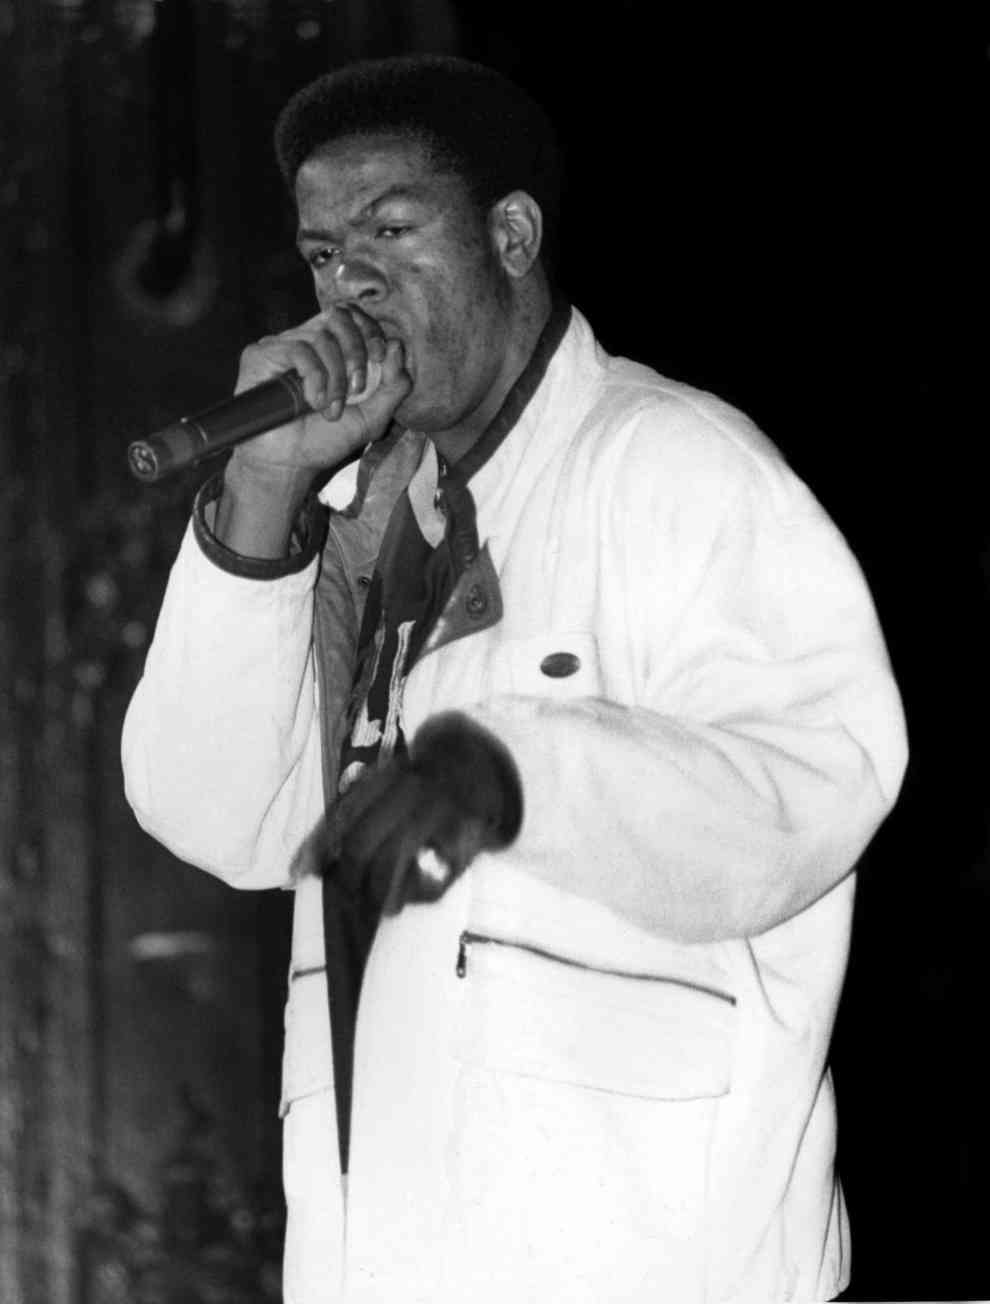 Craig mack performs at the Riviera Theatre in Chicago